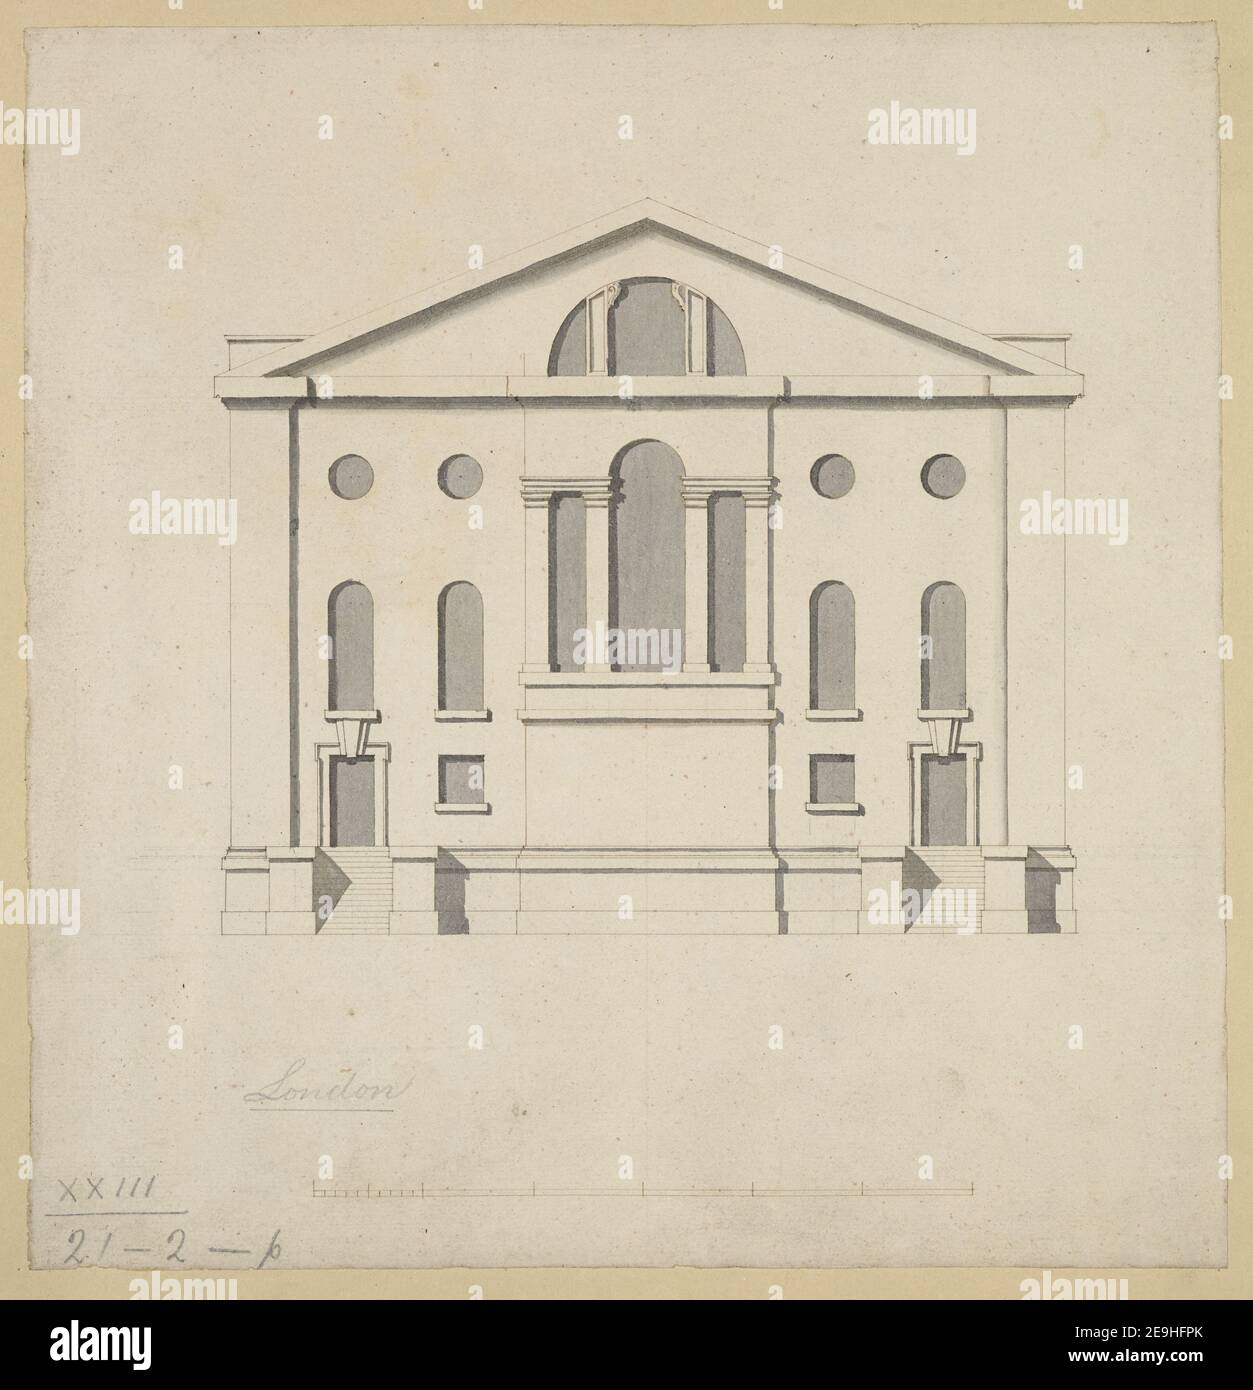 Design for an elevation of a church probably by Nicholas Hawksmoor . Visual Material information:  Title: [Design for an elevation of a church probably by Nicholas Hawksmoor]. 23.21.2.p Date of publication: [between 1714-1726]  Item type: 1 drawing Medium: pen and brown ink with monochrome wash Dimensions: 28.7 x 27.4 cm  Former owner: George III, King of Great Britain, 1738-1820 Stock Photo